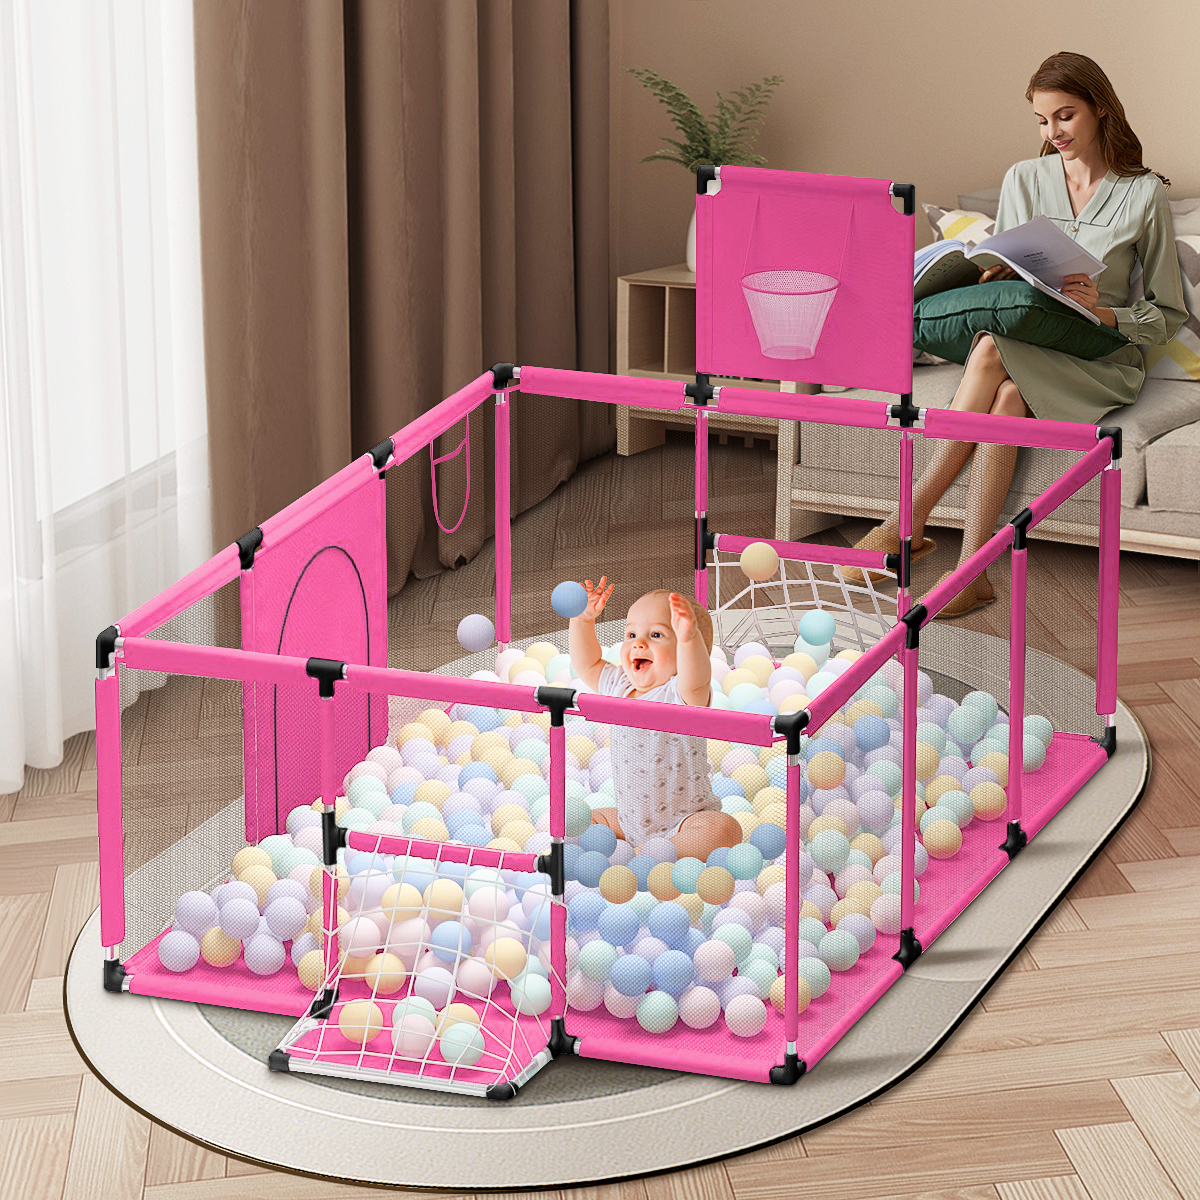 Baby-Playpen-Oxford-Cloth-Children-Infant-Fence-Safety-Barriers-Children-Ball-Pool-Baby-Playground-G-1935212-5